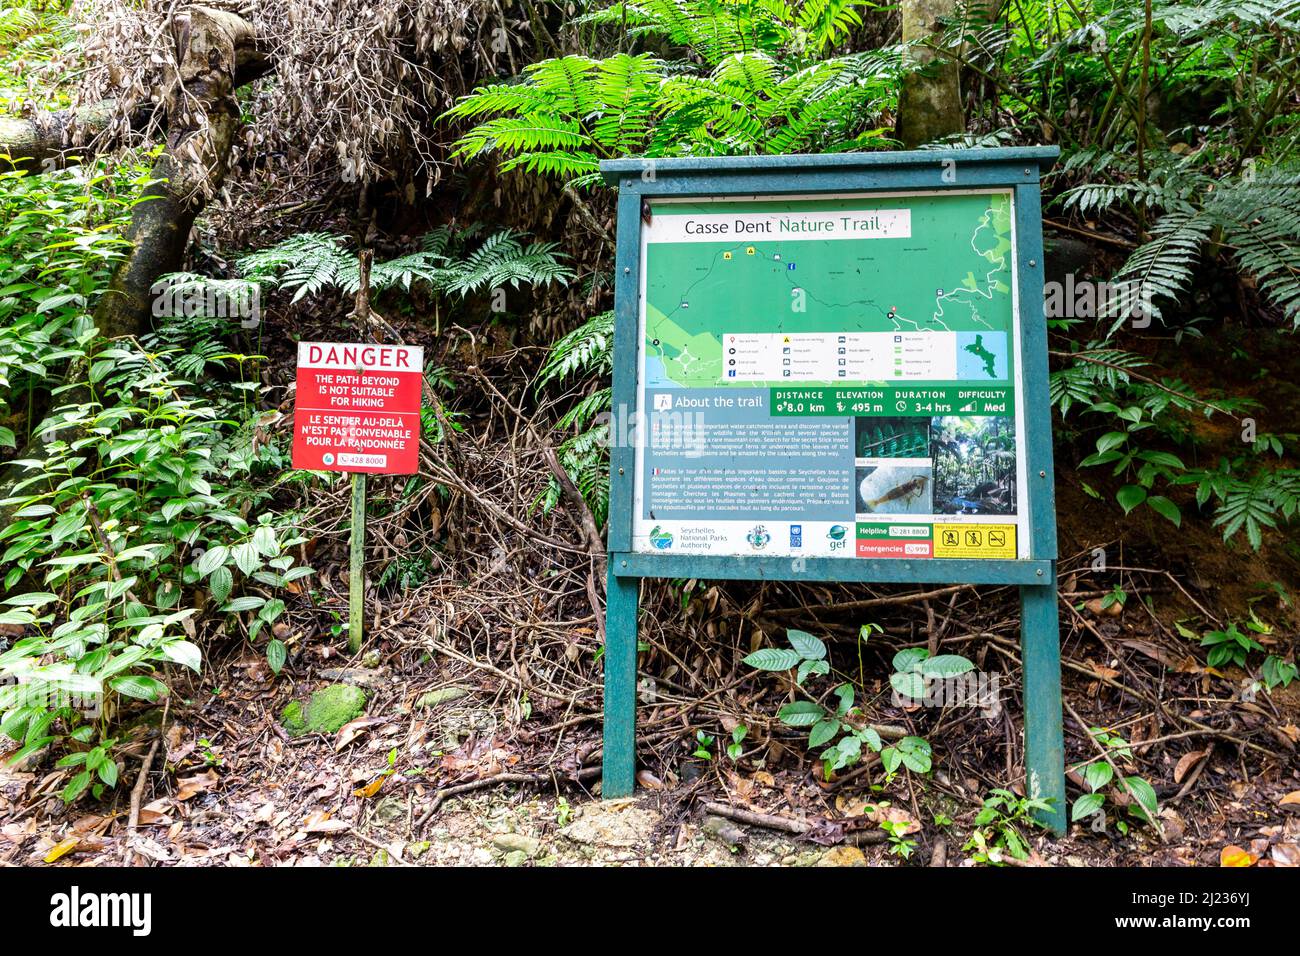 Mahe, Seychelles, 3.05.2021. Casse Dent Nature Trail tourist information board with closed trail information sign in Morne Seychelles National Park. Stock Photo